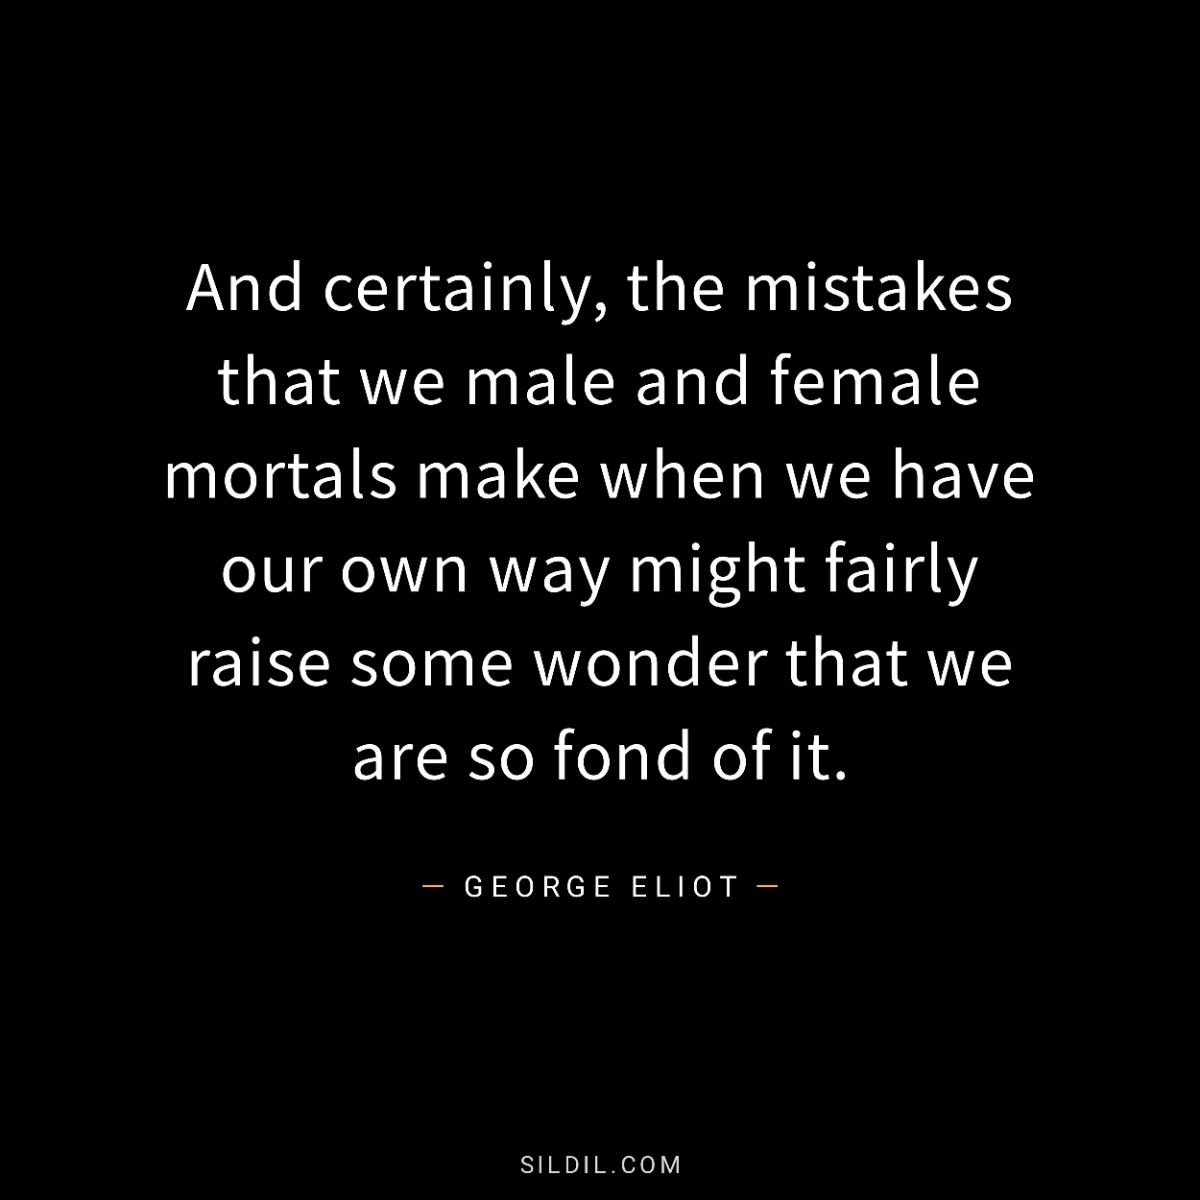 And certainly, the mistakes that we male and female mortals make when we have our own way might fairly raise some wonder that we are so fond of it.